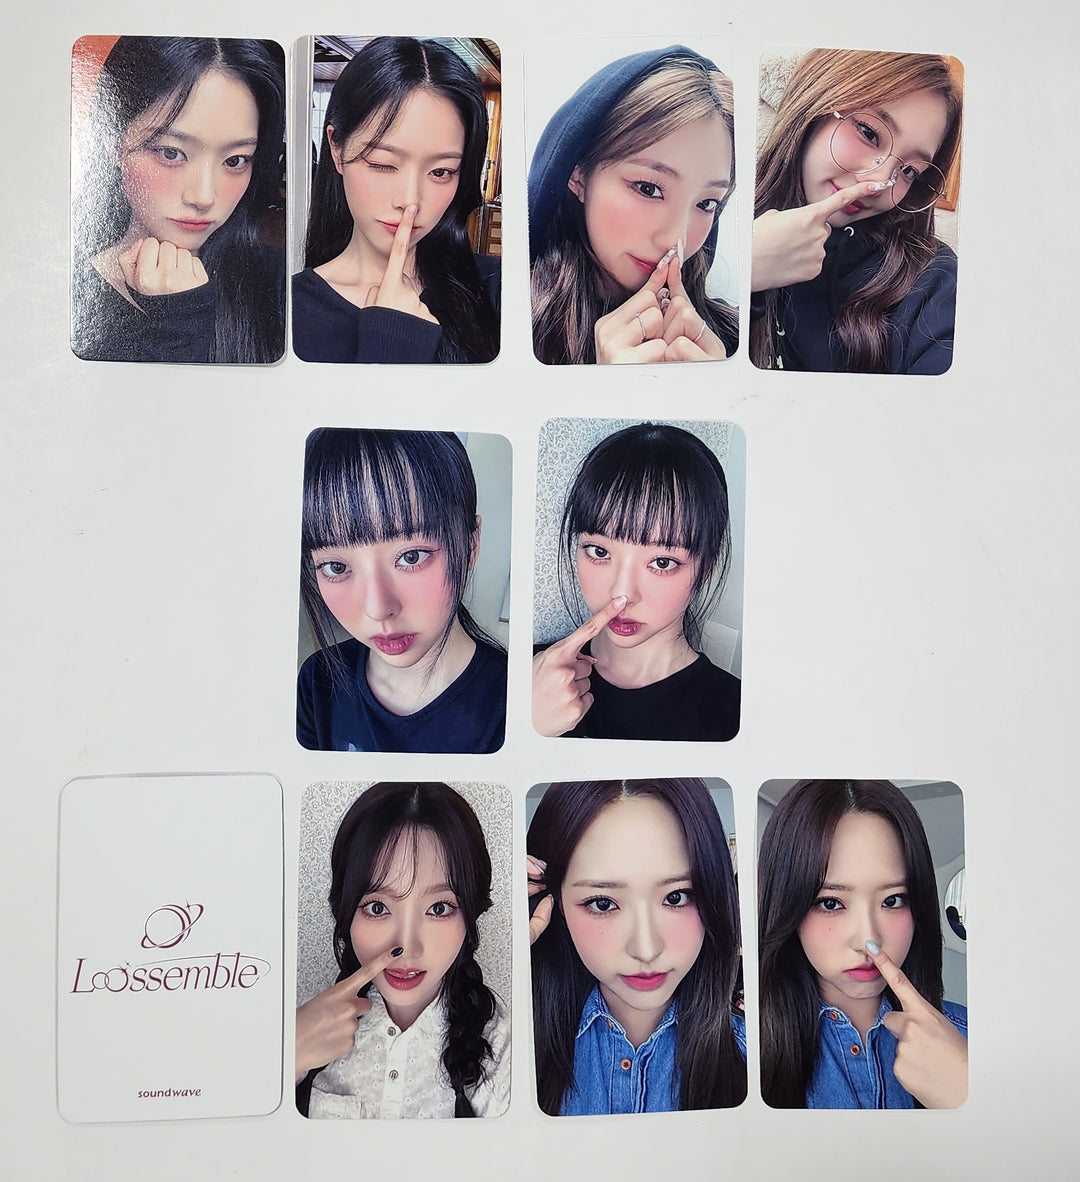 Loossemble "Loossemble" - Soundwave Fansign Event Photocard Round 2 [23.10.04]